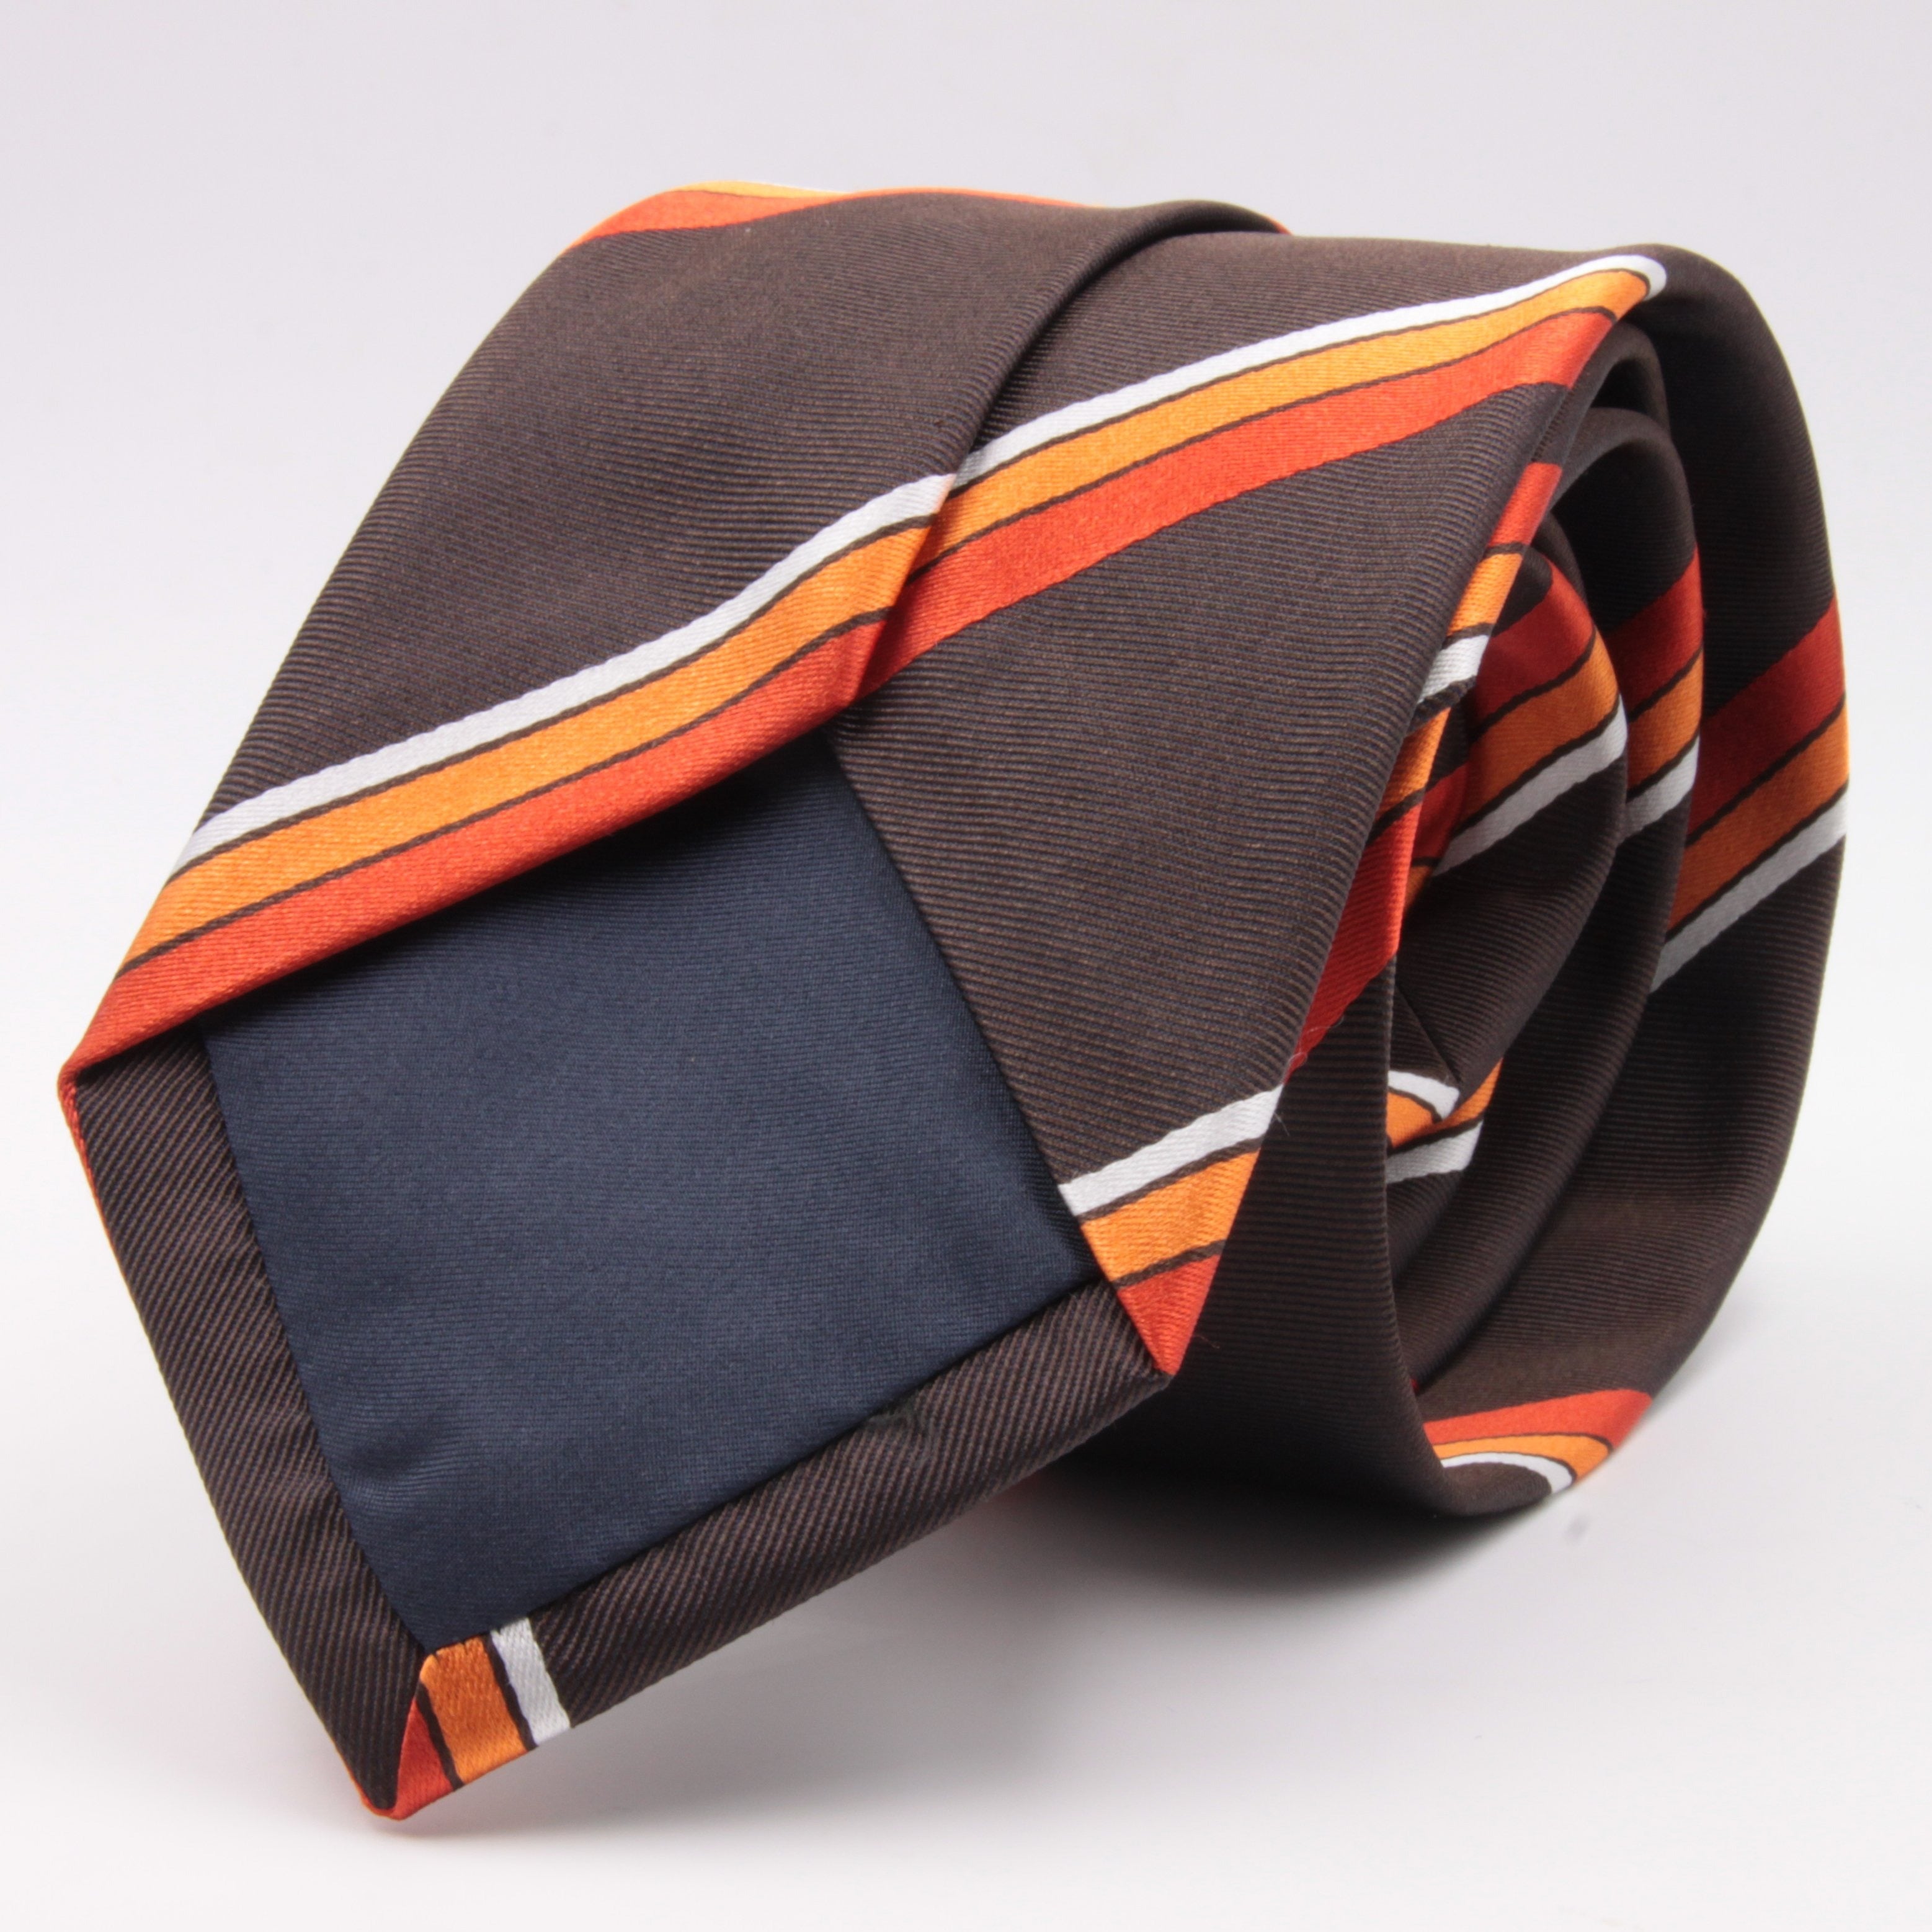 Cruciani & Bella 100% Silk Jacquard  Tipped Brown, Orange and White Striped Tie Handmade in Italy 8 cm x 150 cm #4442 Options whit final "A"